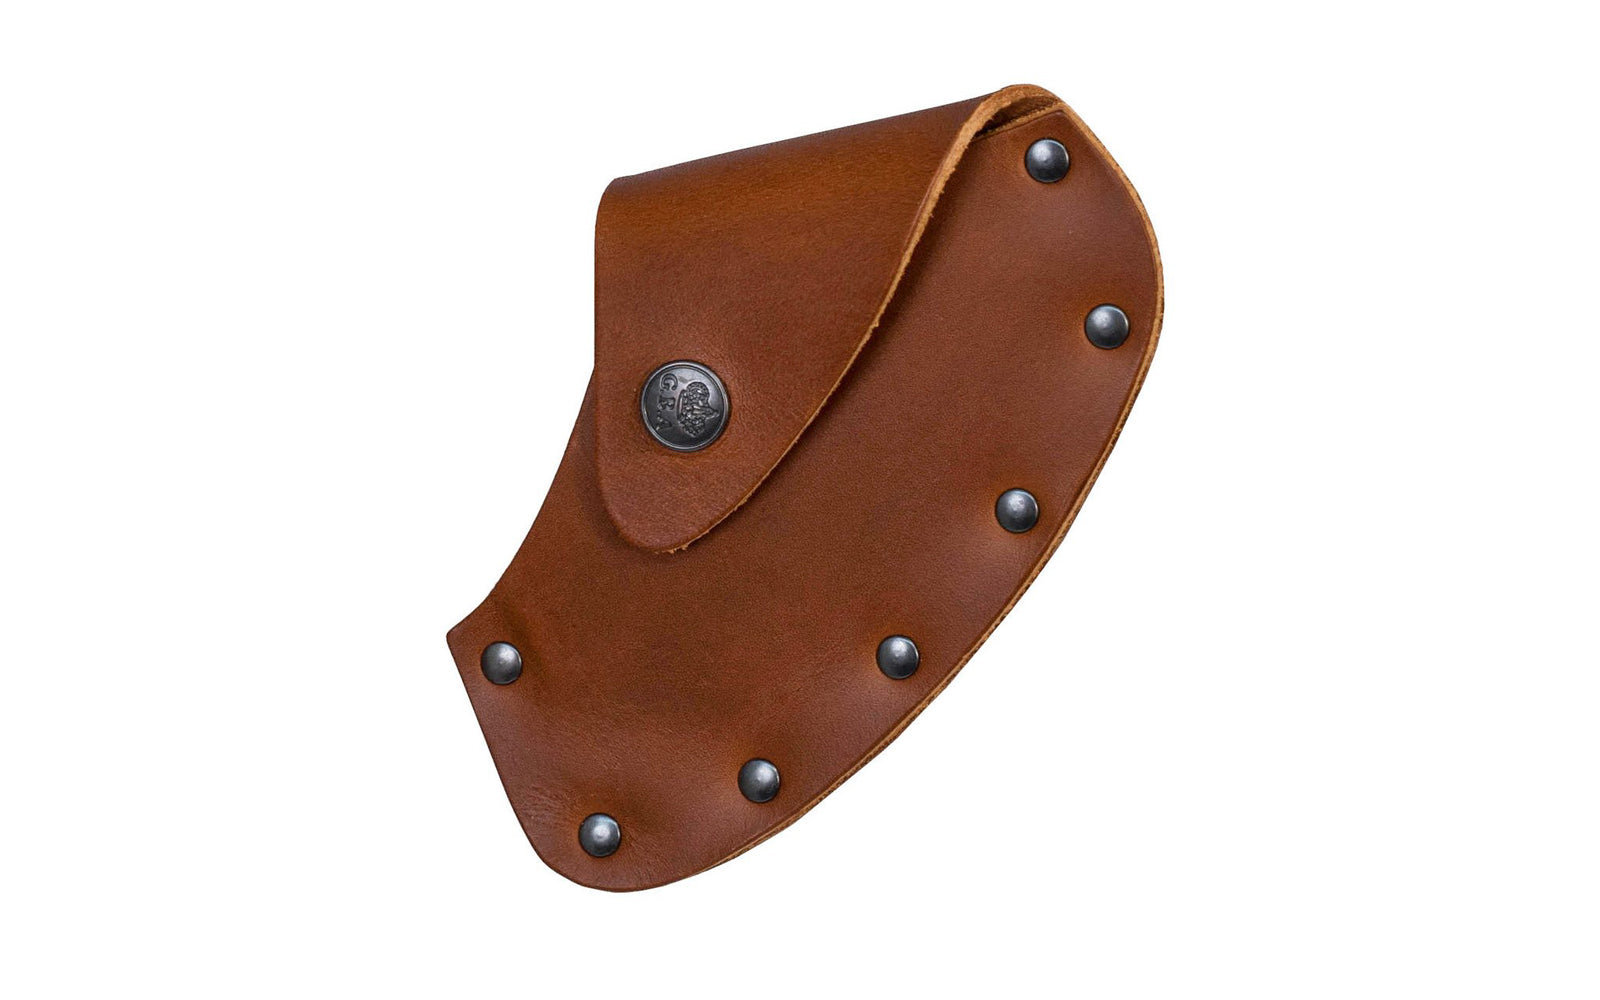 Gränsfors Bruk grain leather sheath is designed for the Swedish Axe No. 475. The vegetable-tanned leather is free from heavy metals & is biodegradable.  7391765475084. Model 475C